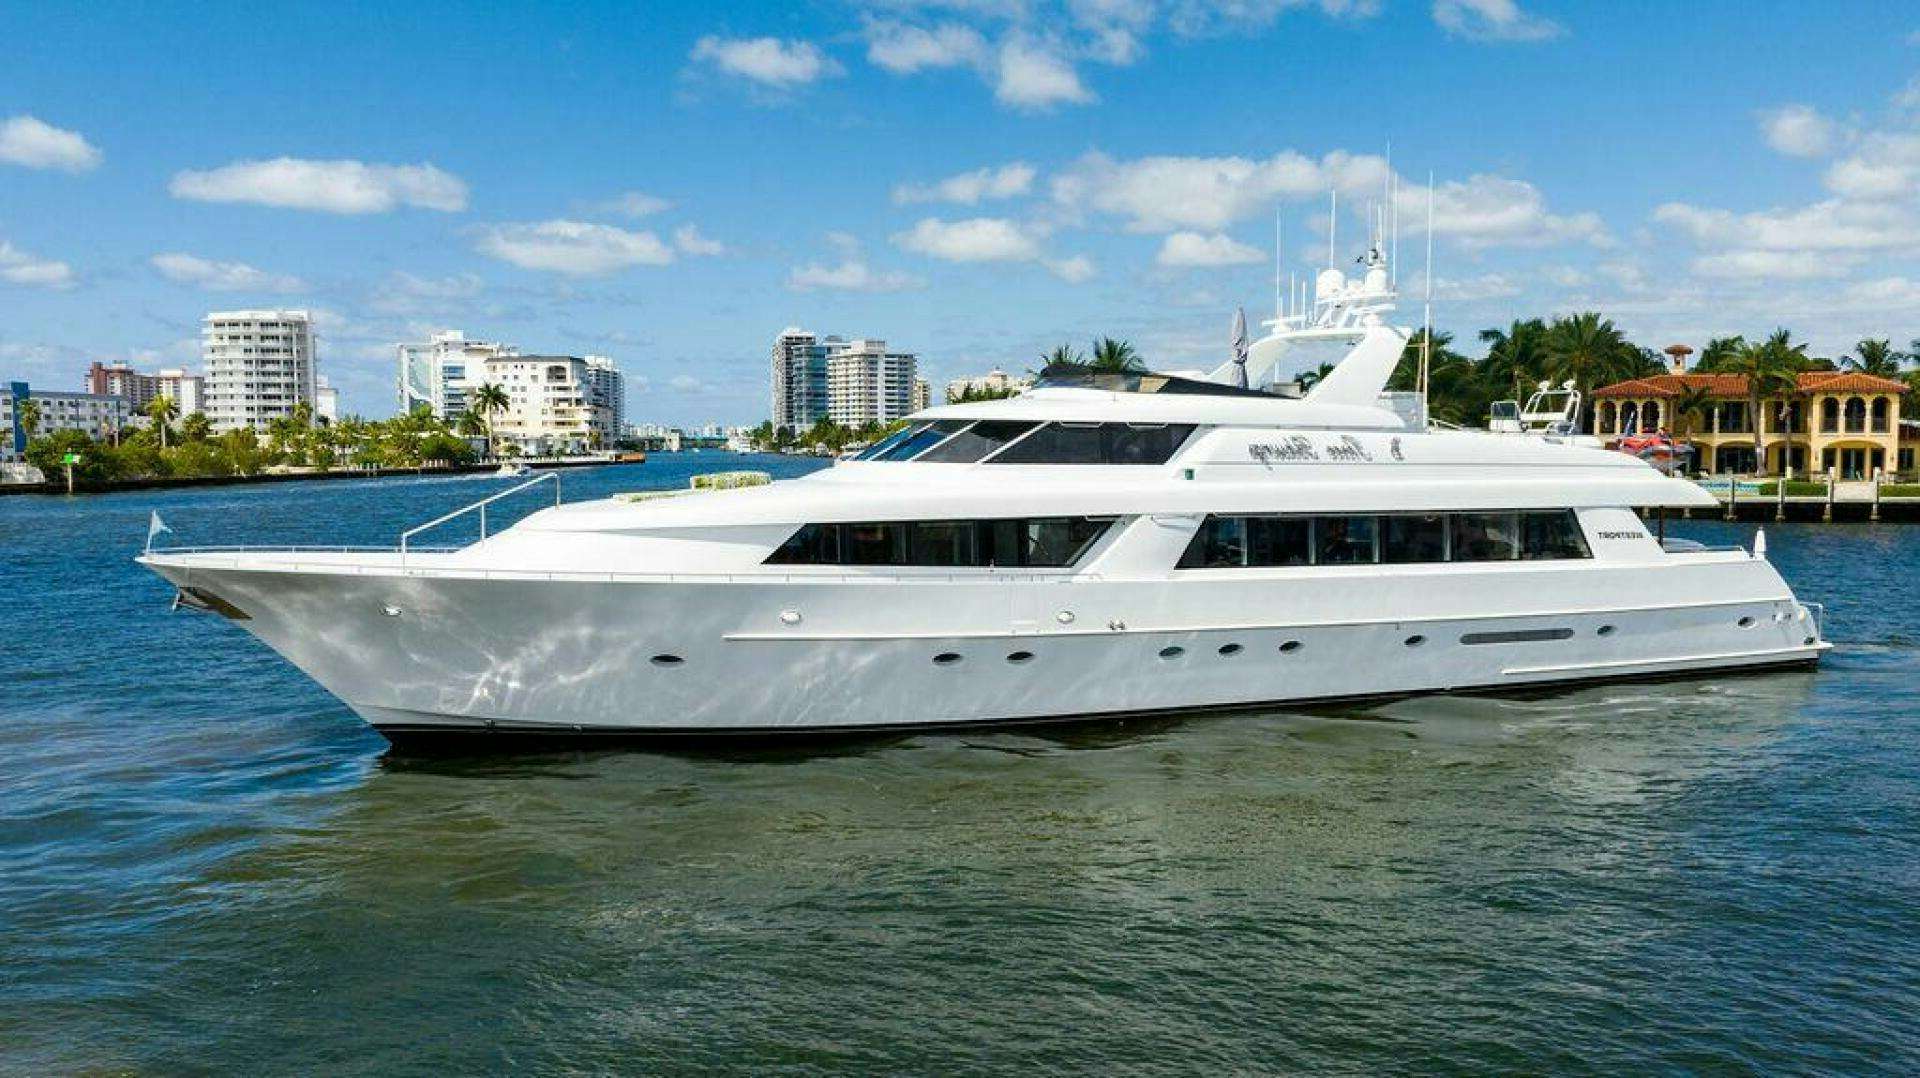 Three blessings
Yacht for Sale